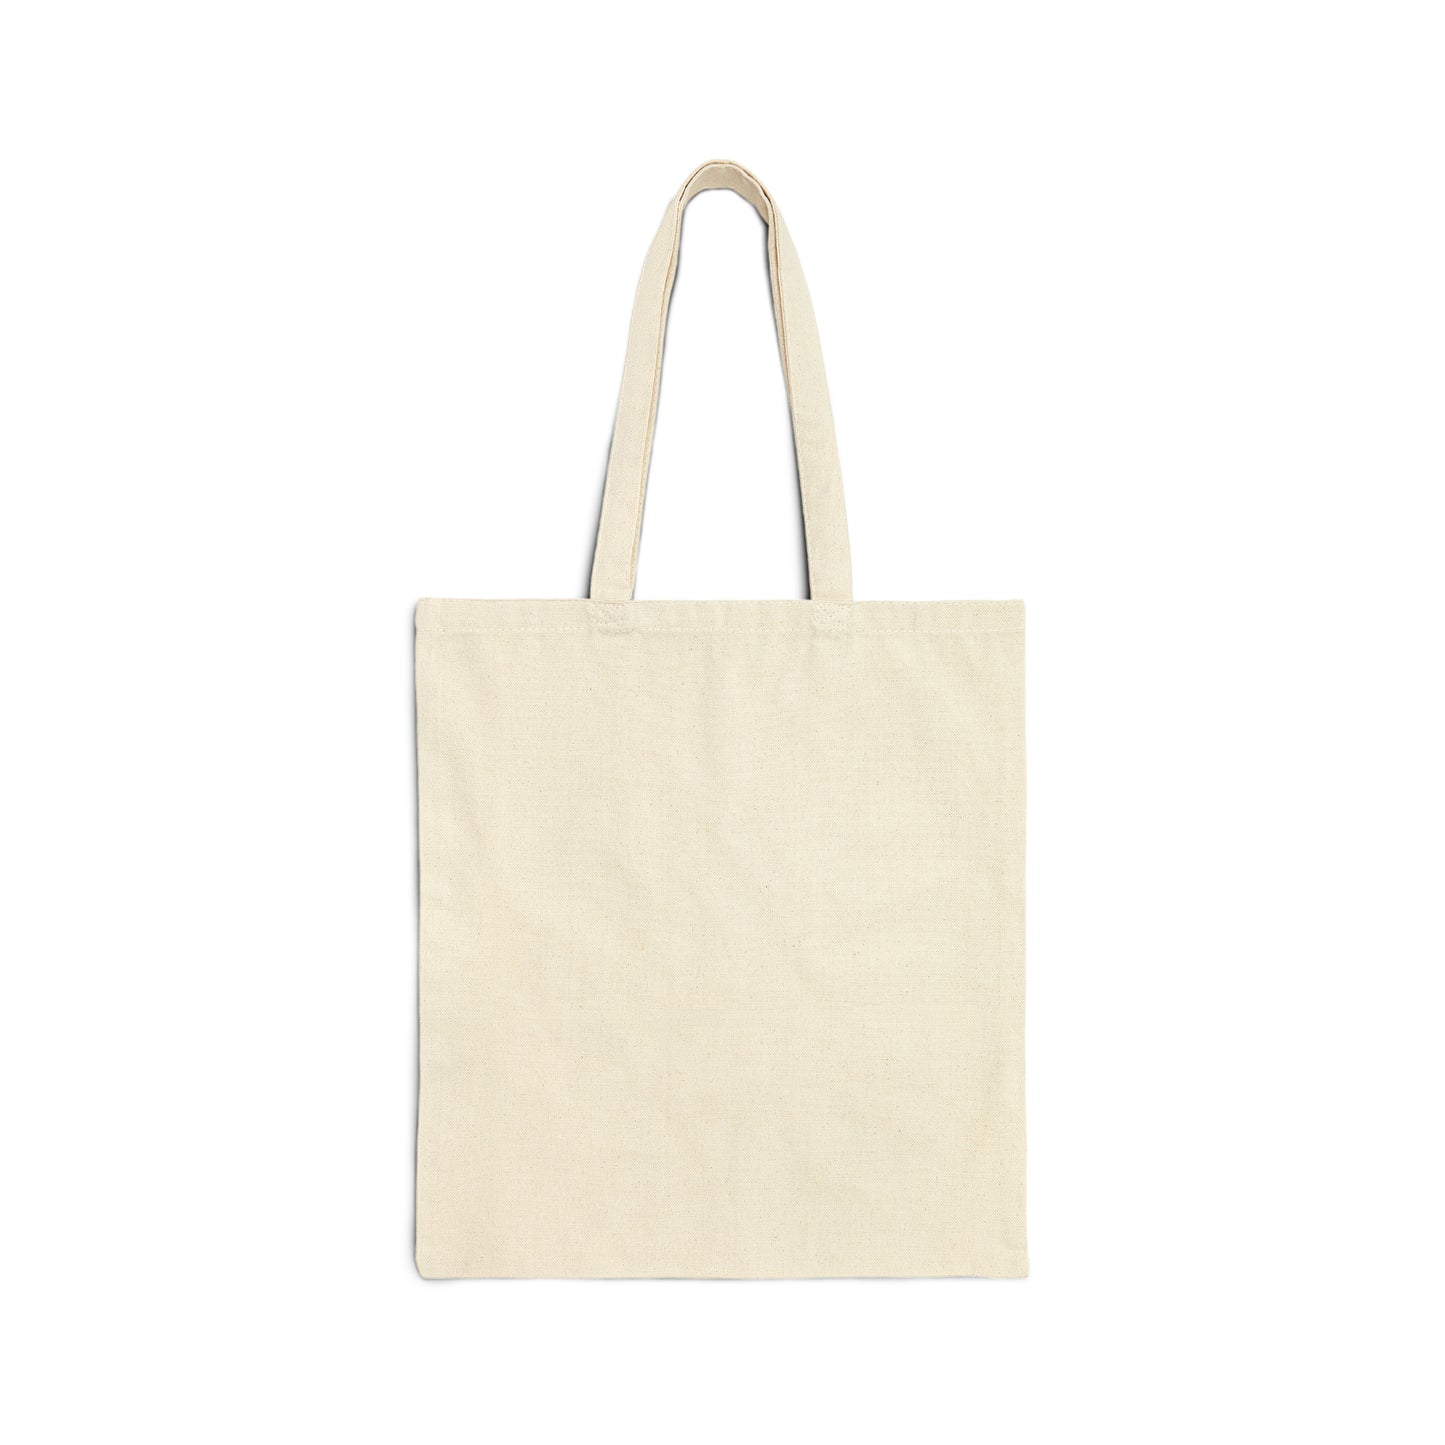 Stronger than my Scars Cotton Canvas Tote Bag